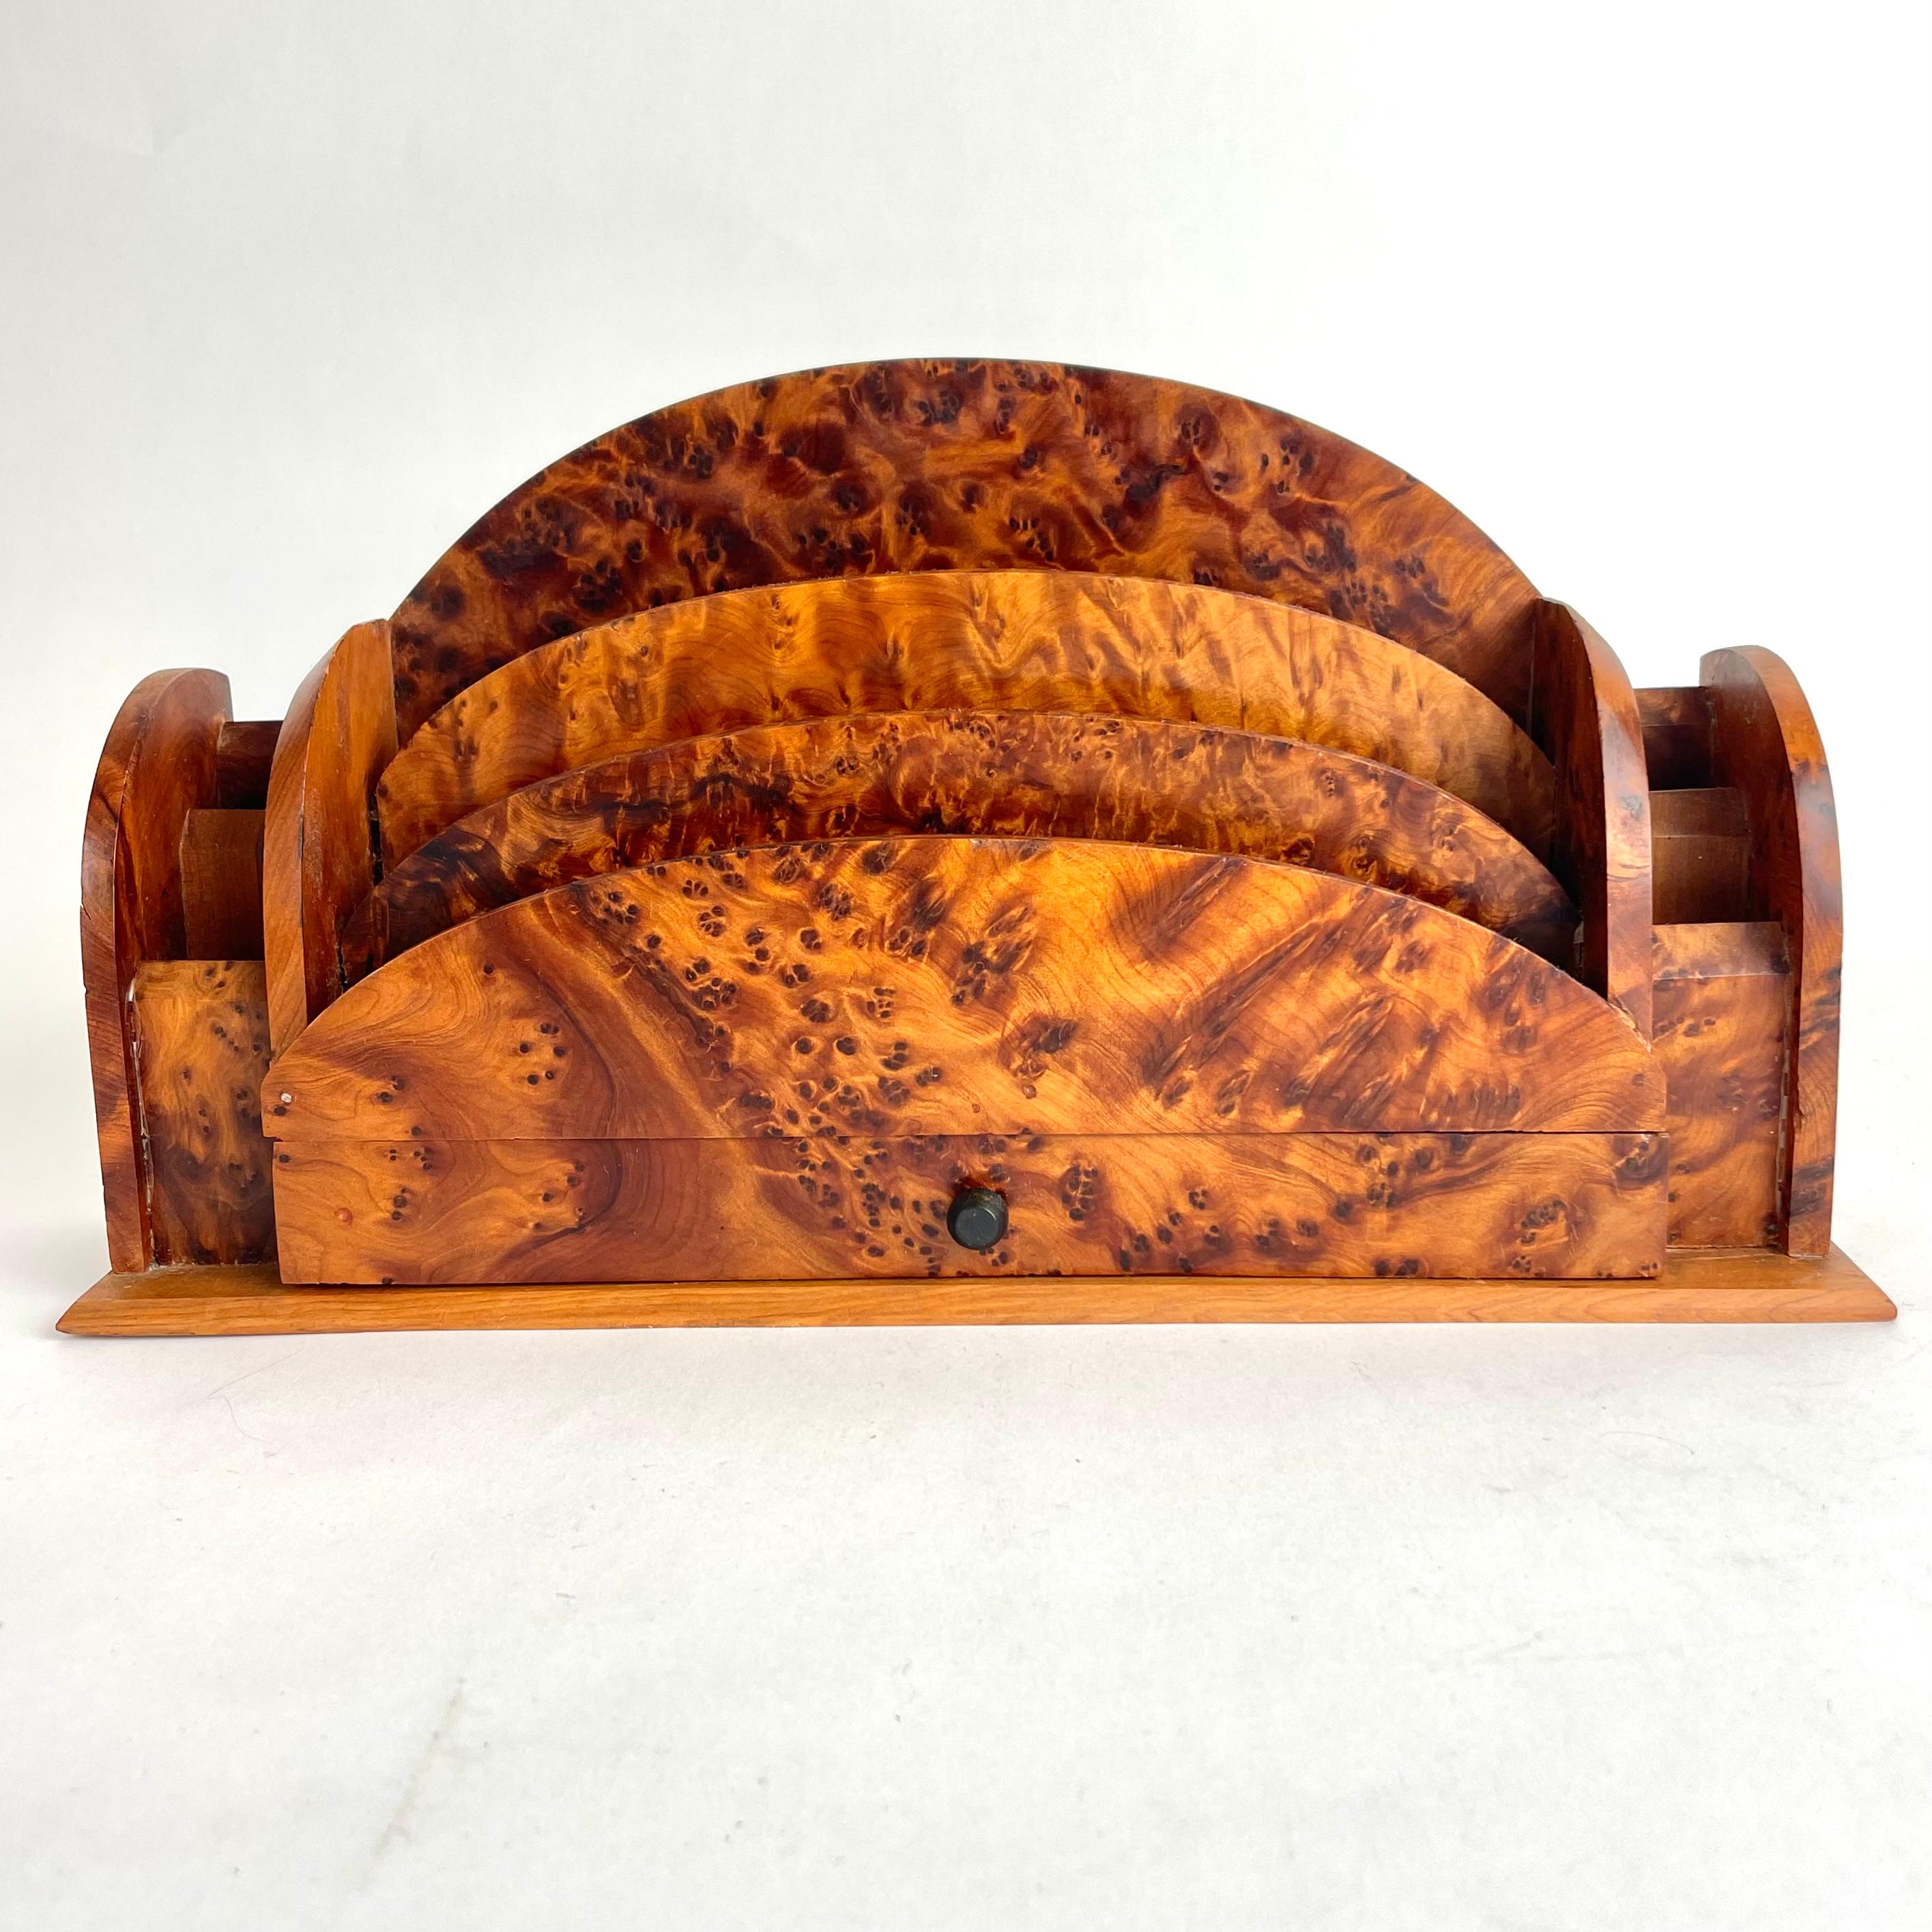 A Beautiful Letter Stand with Thuja burl from the 1930s. Very period Art Deco design. The letter stand designed with a drawer, rack for letters and pens.

Wear consistent with age and use 